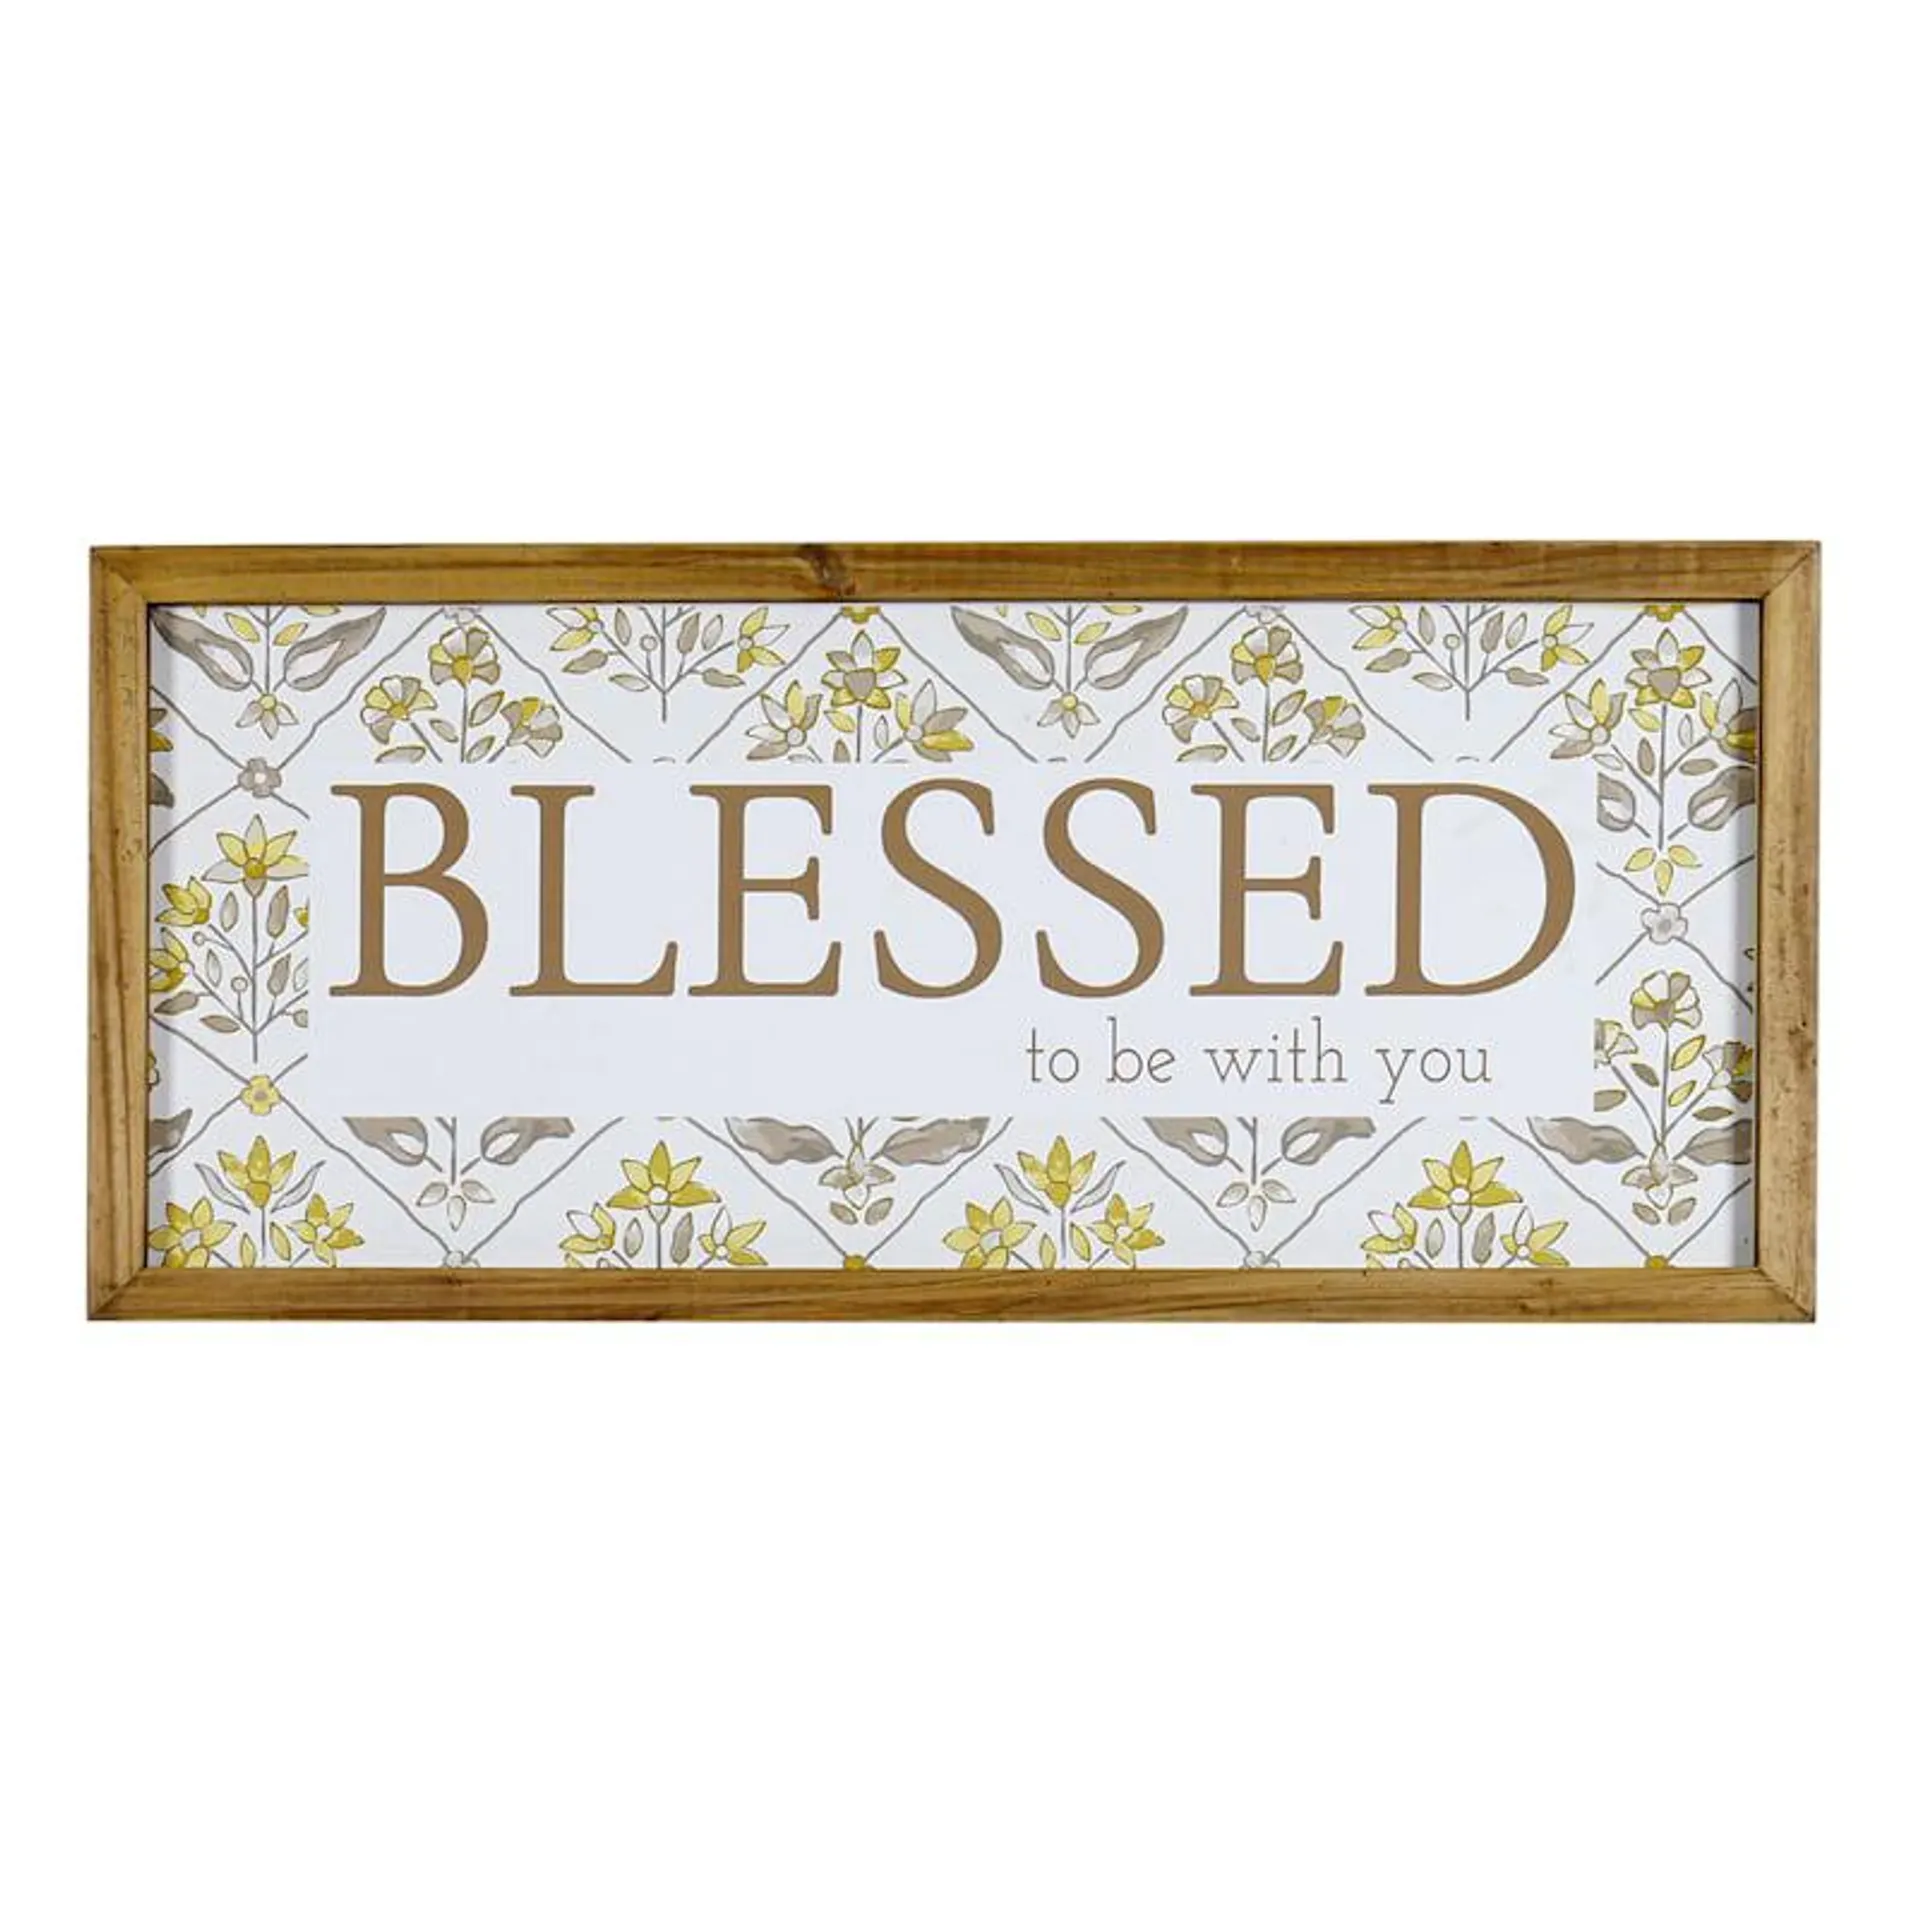 Blessed Wall Sign, 24x11